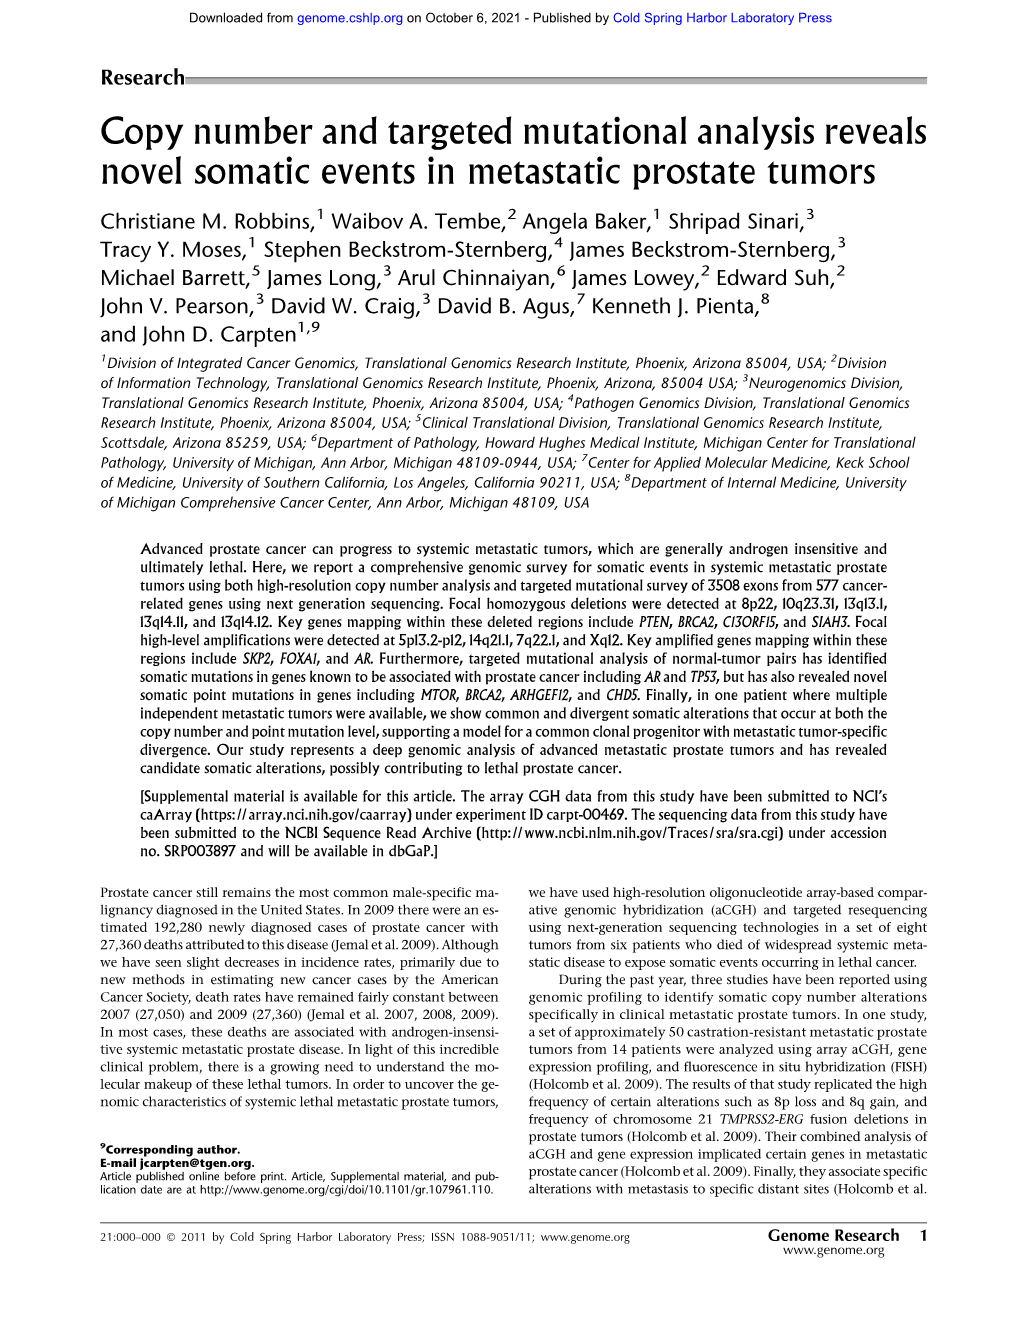 Copy Number and Targeted Mutational Analysis Reveals Novel Somatic Events in Metastatic Prostate Tumors